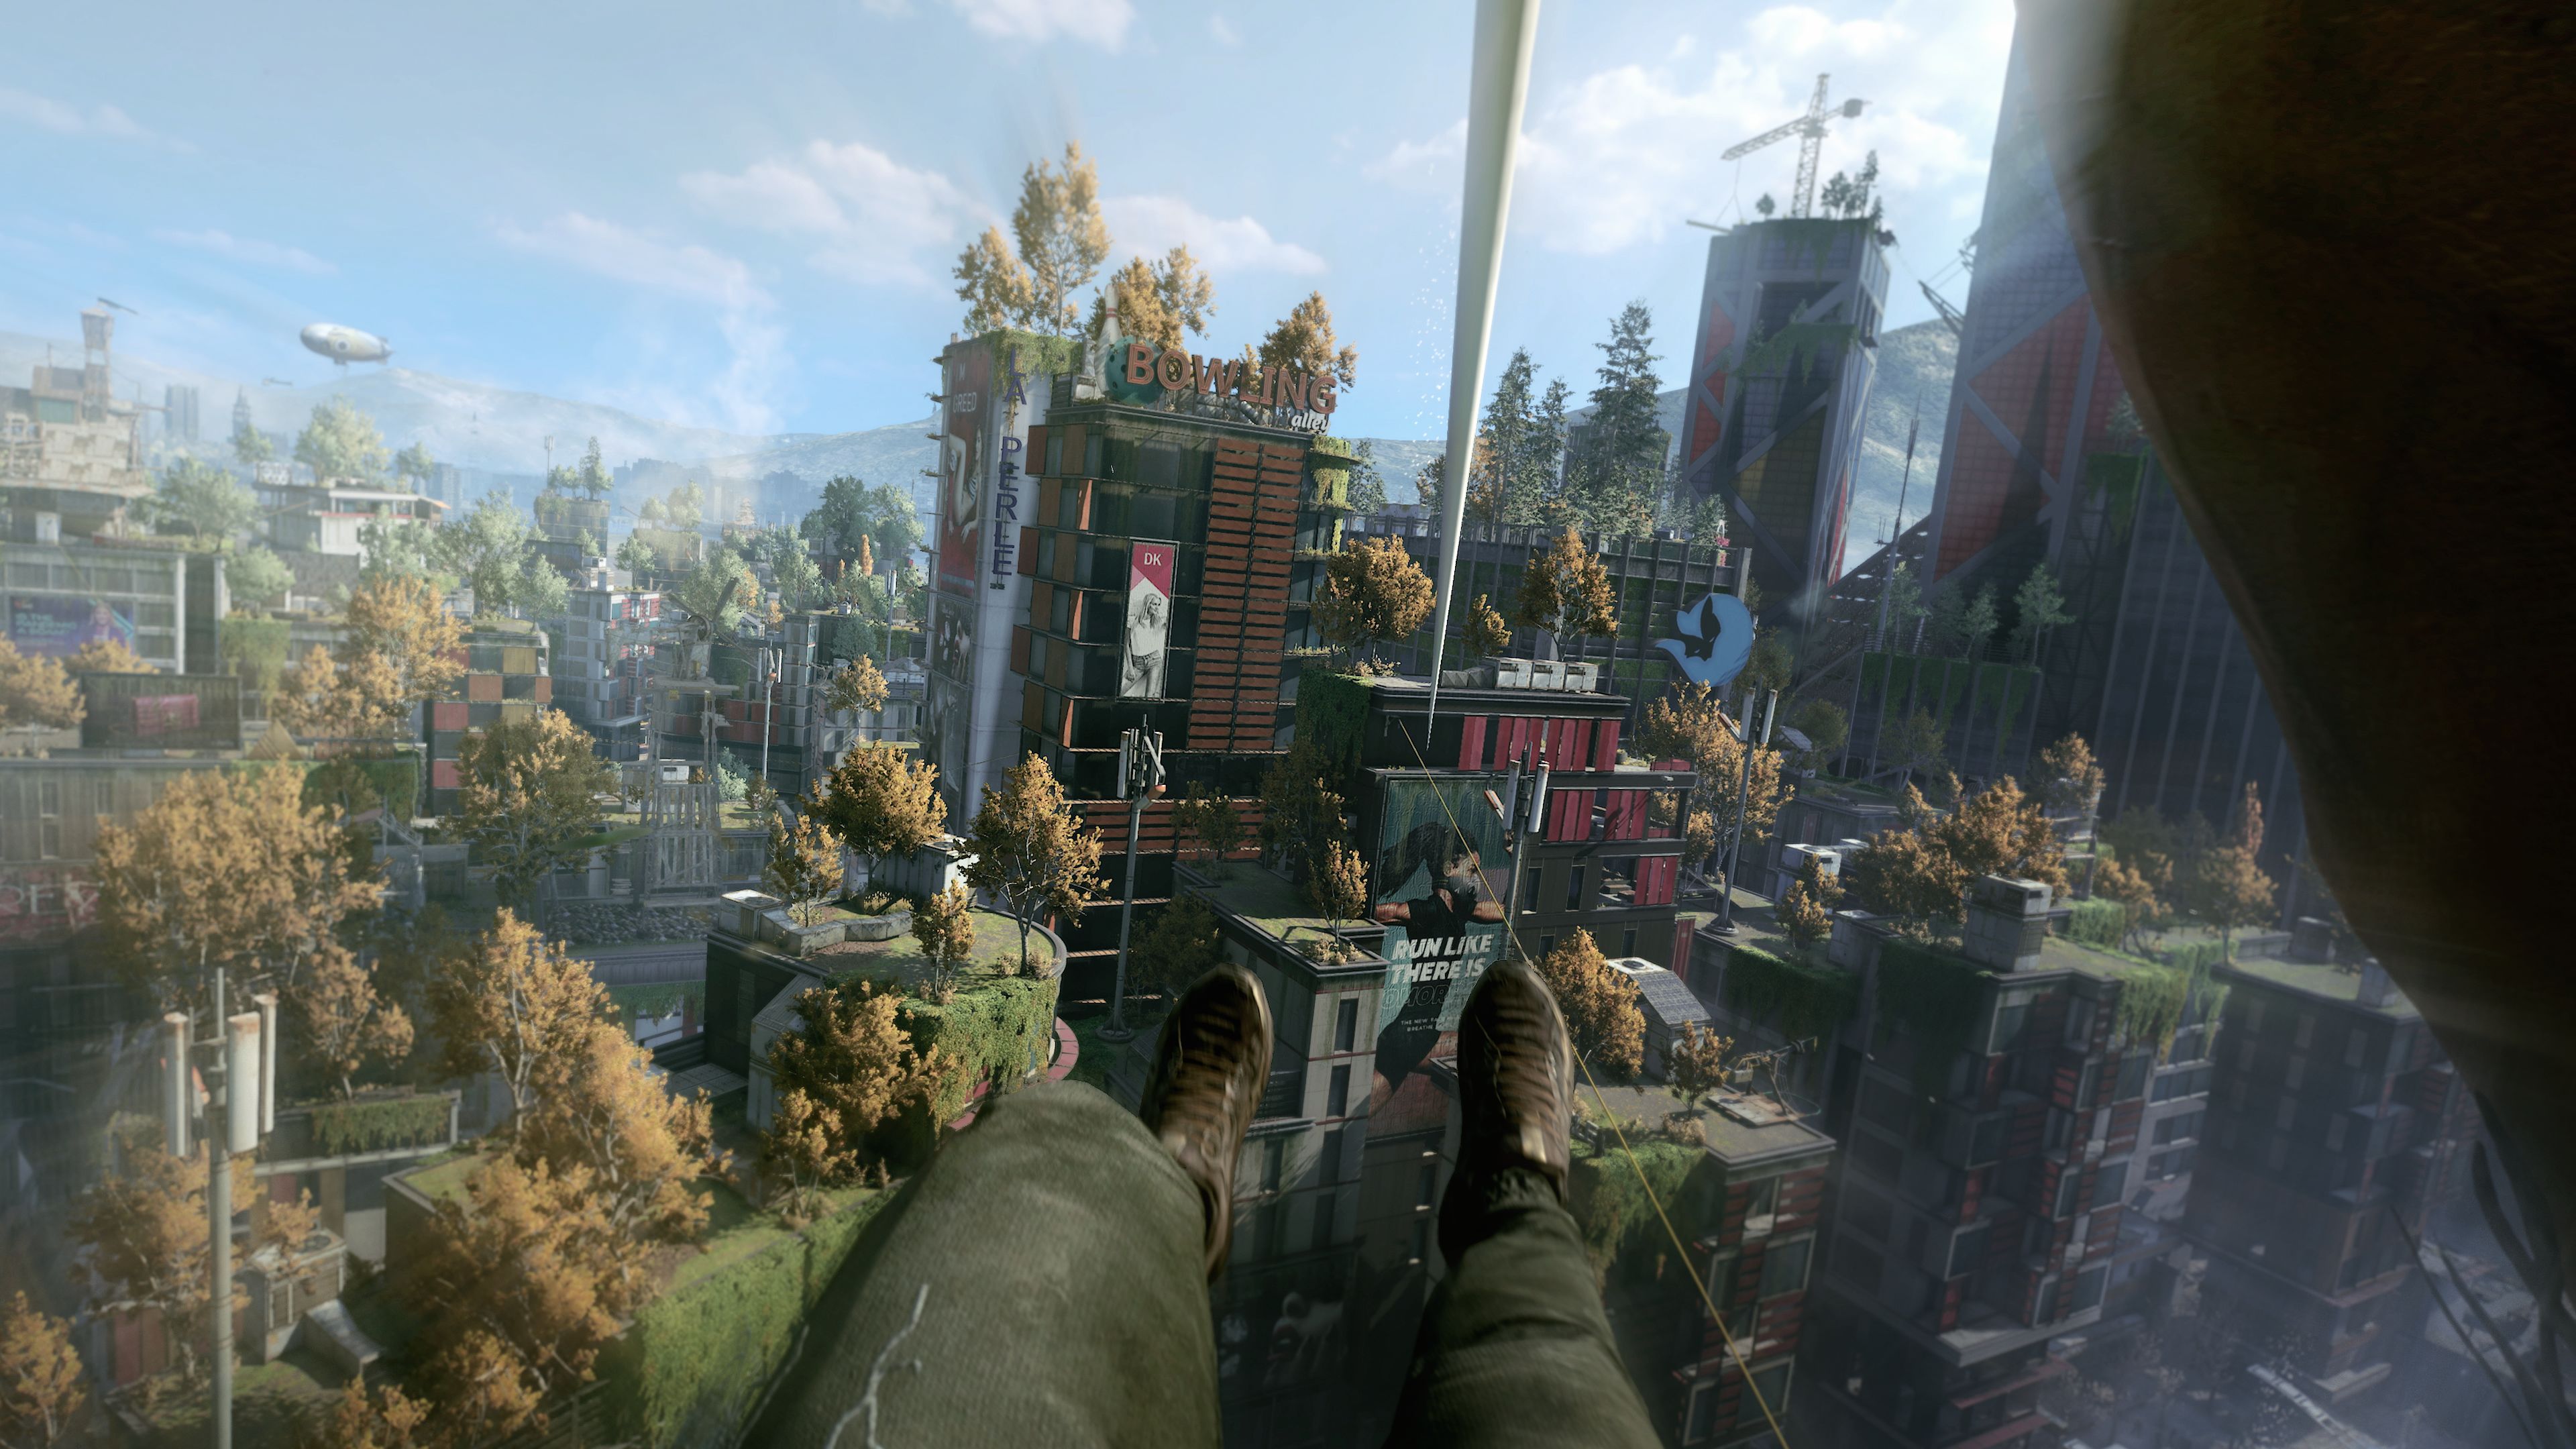 dying light only launches once